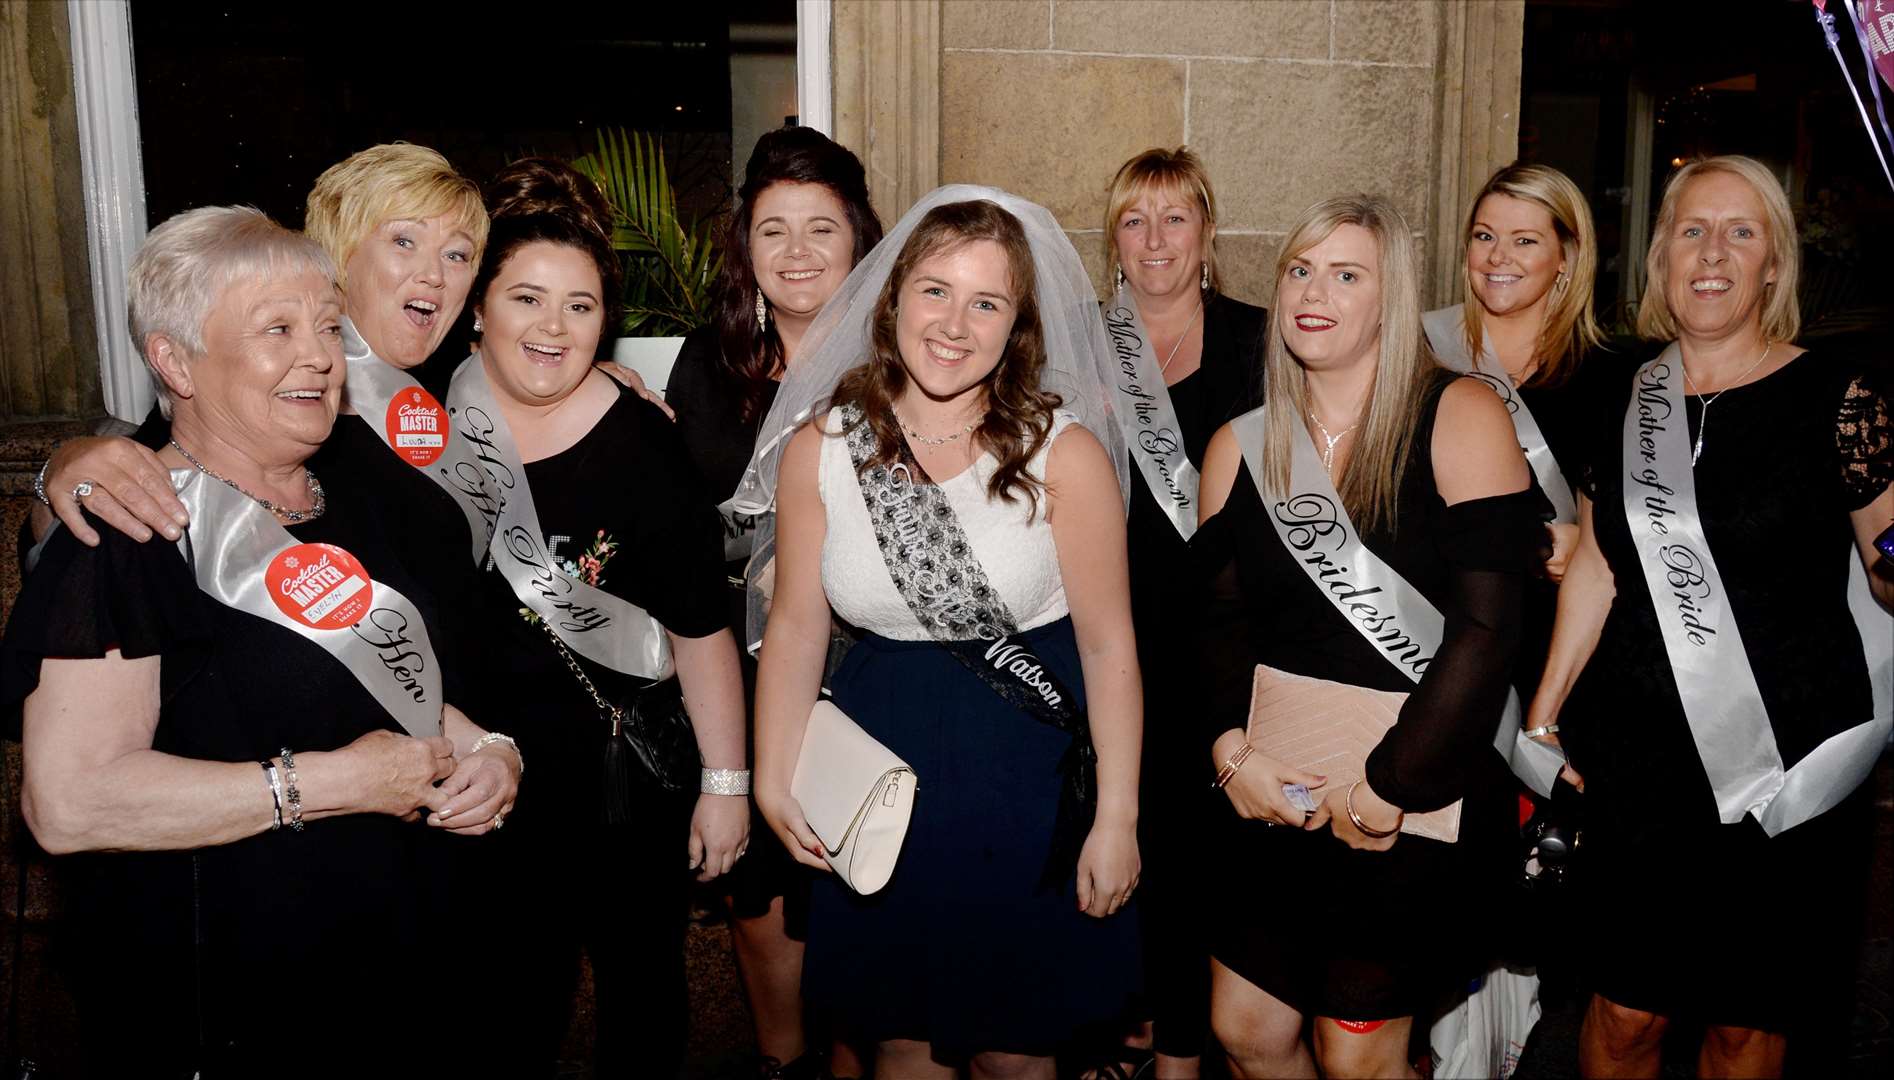 July bride to be Gemma Reid (centre) on her hen party.